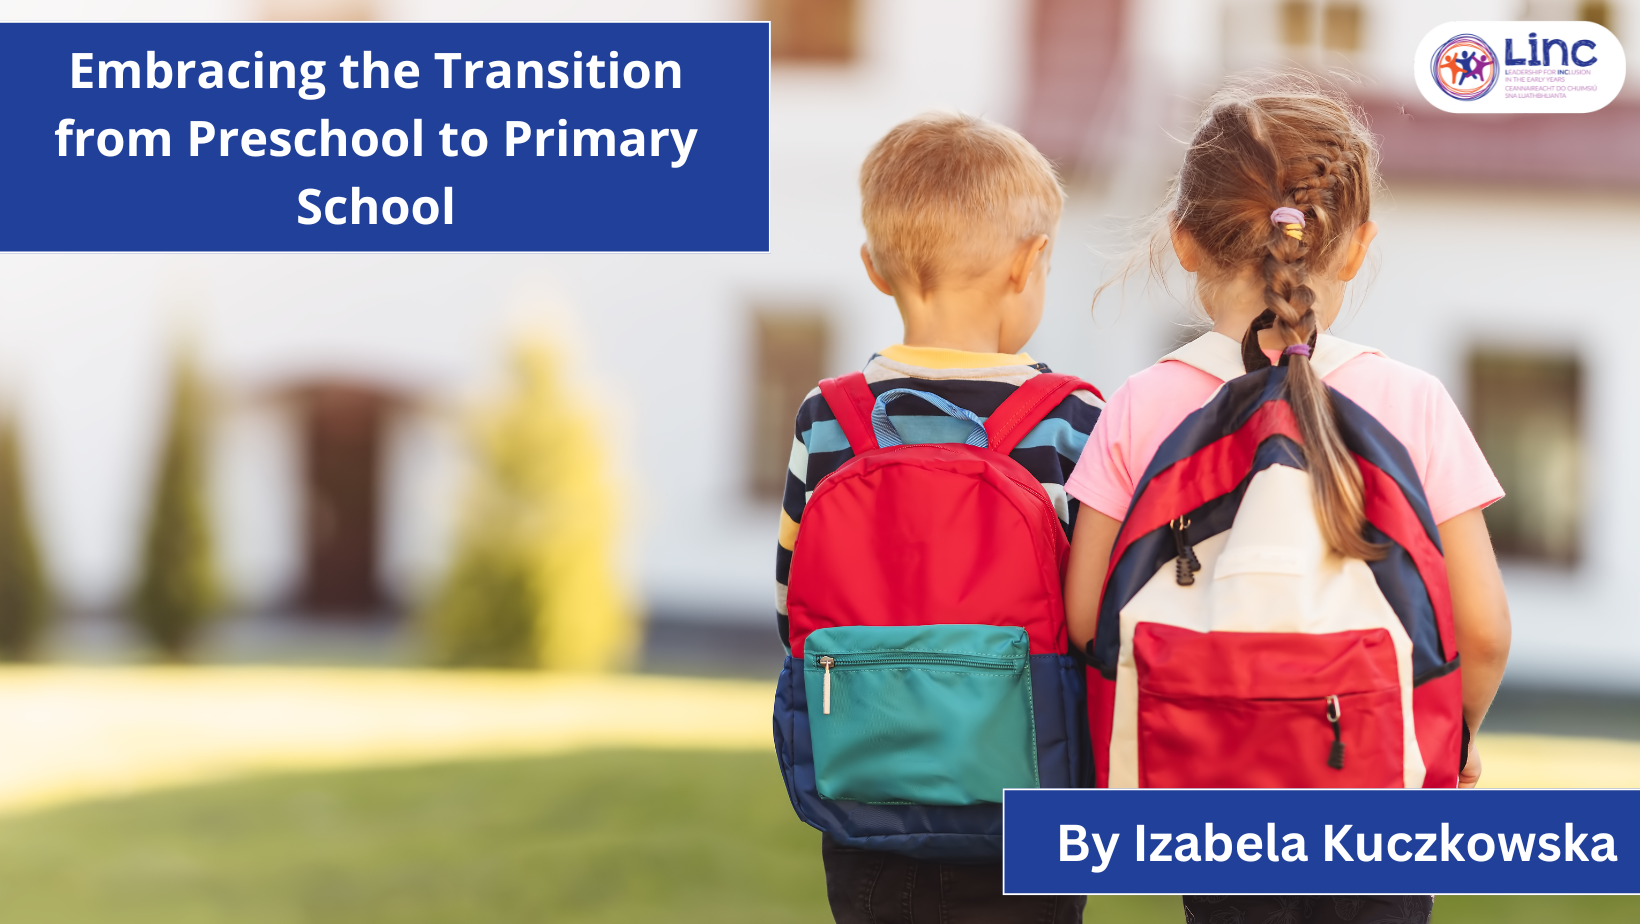 Embracing the Transition from Preschool to Primary School